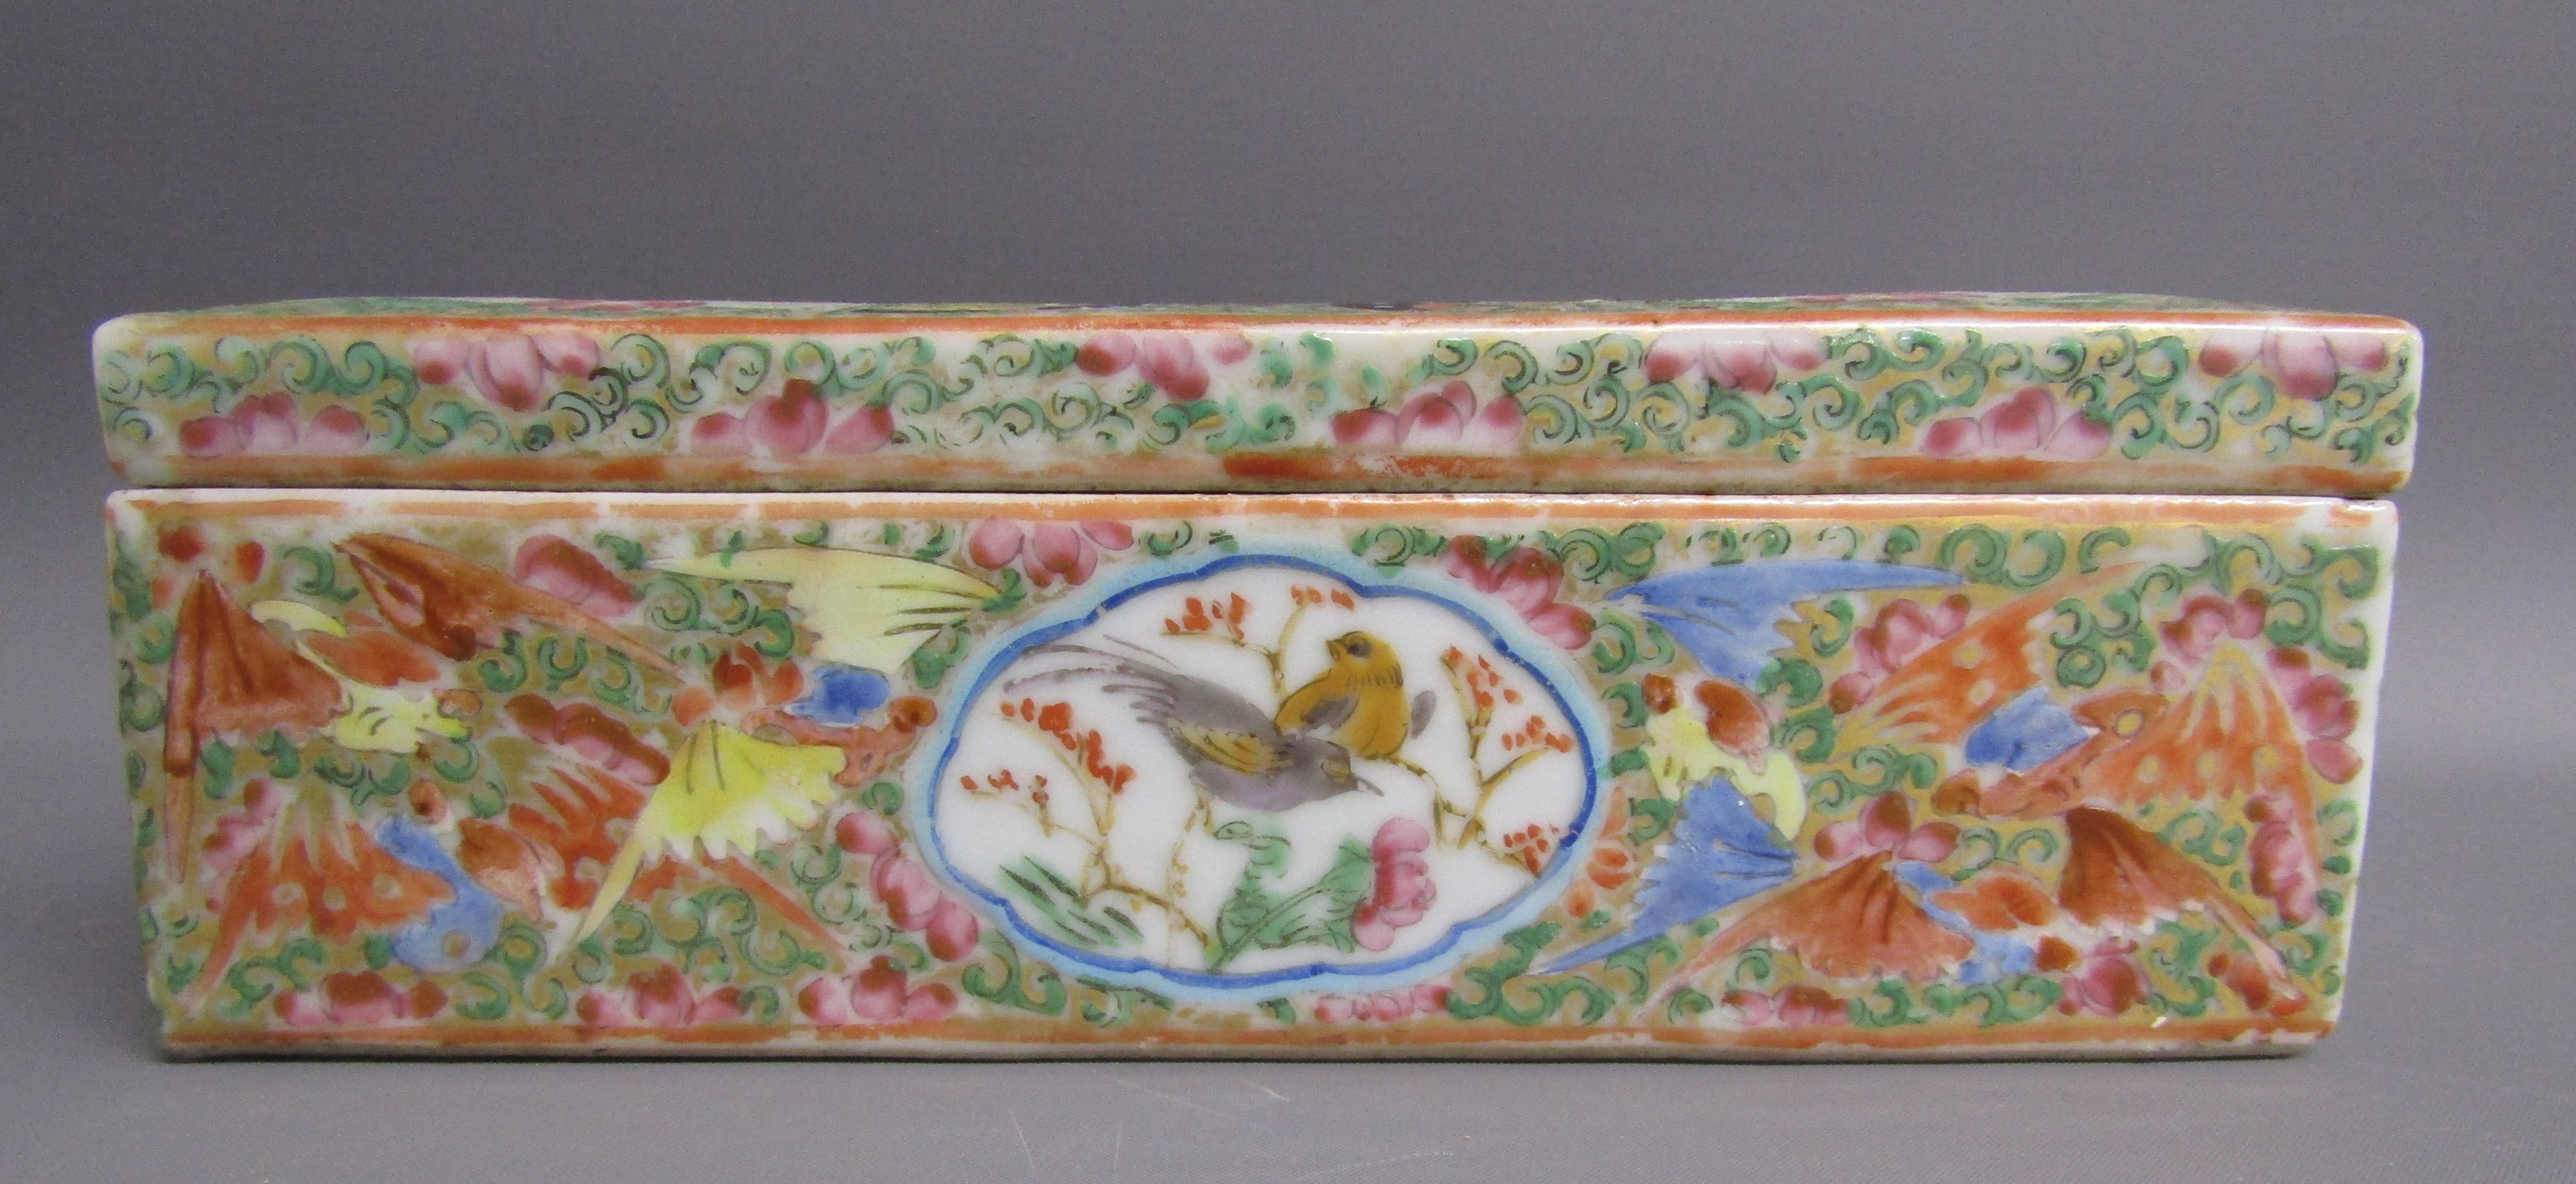 Cantonese lidded porcelain pen pot painted with figures and birds - approx. 9cm x 10cm x 6cm - Image 7 of 11